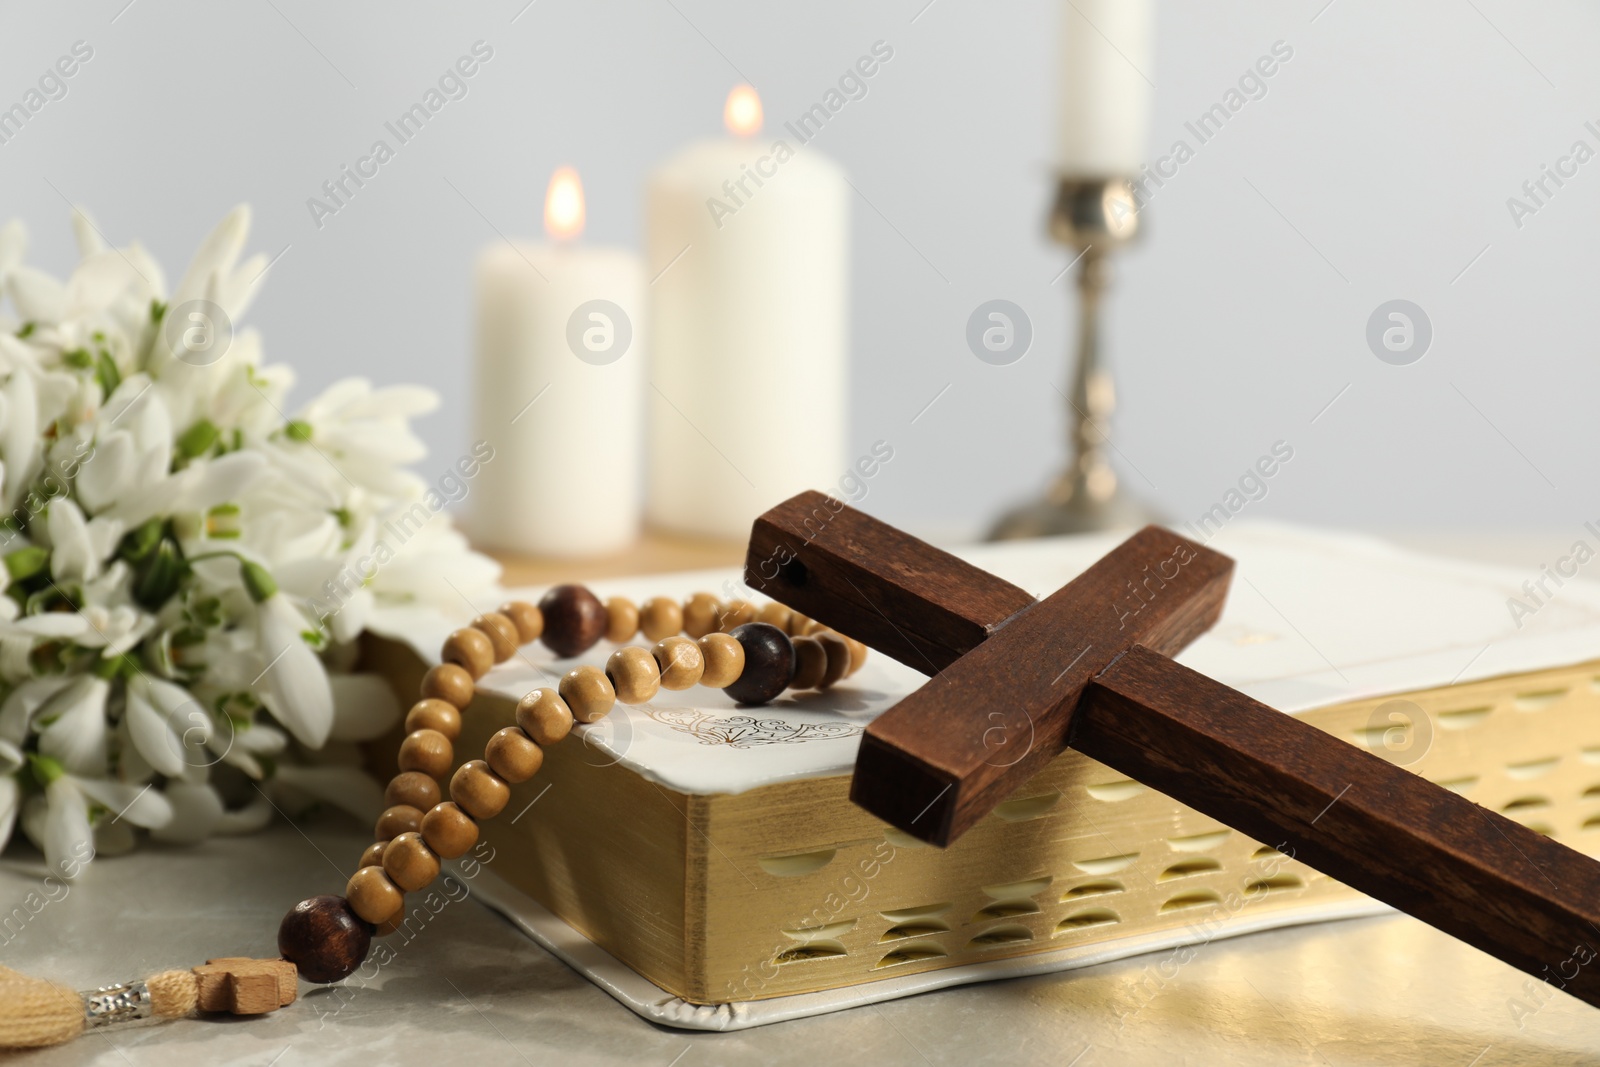 Photo of Wooden cross, Bible, rosary beads, flowers and church candles on light table, closeup